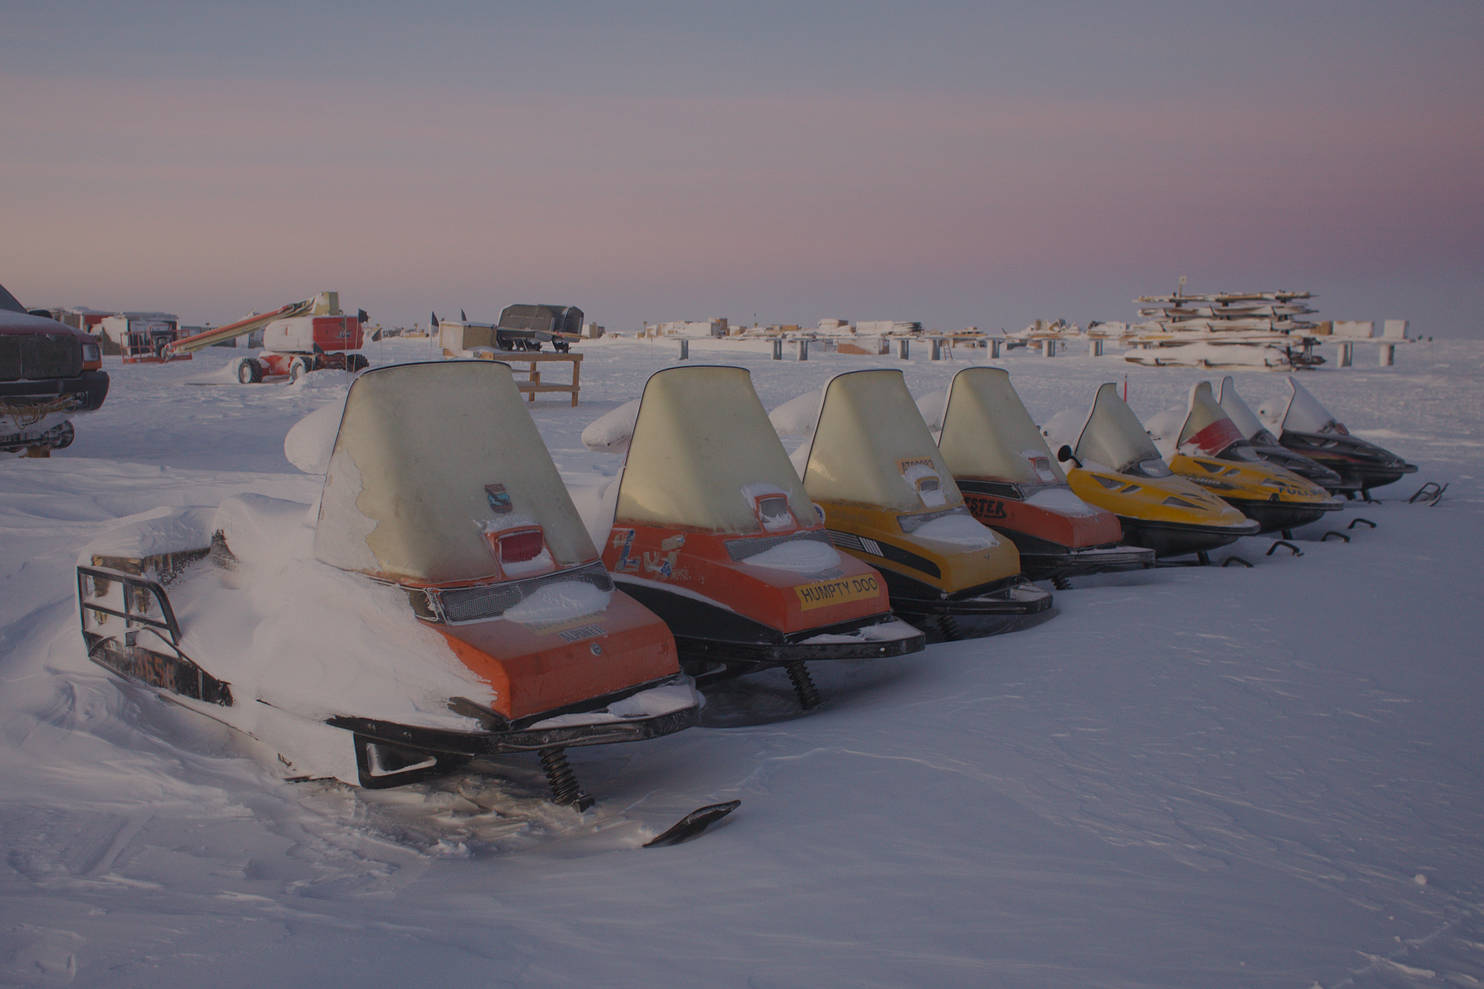 A row of snowmobiles.